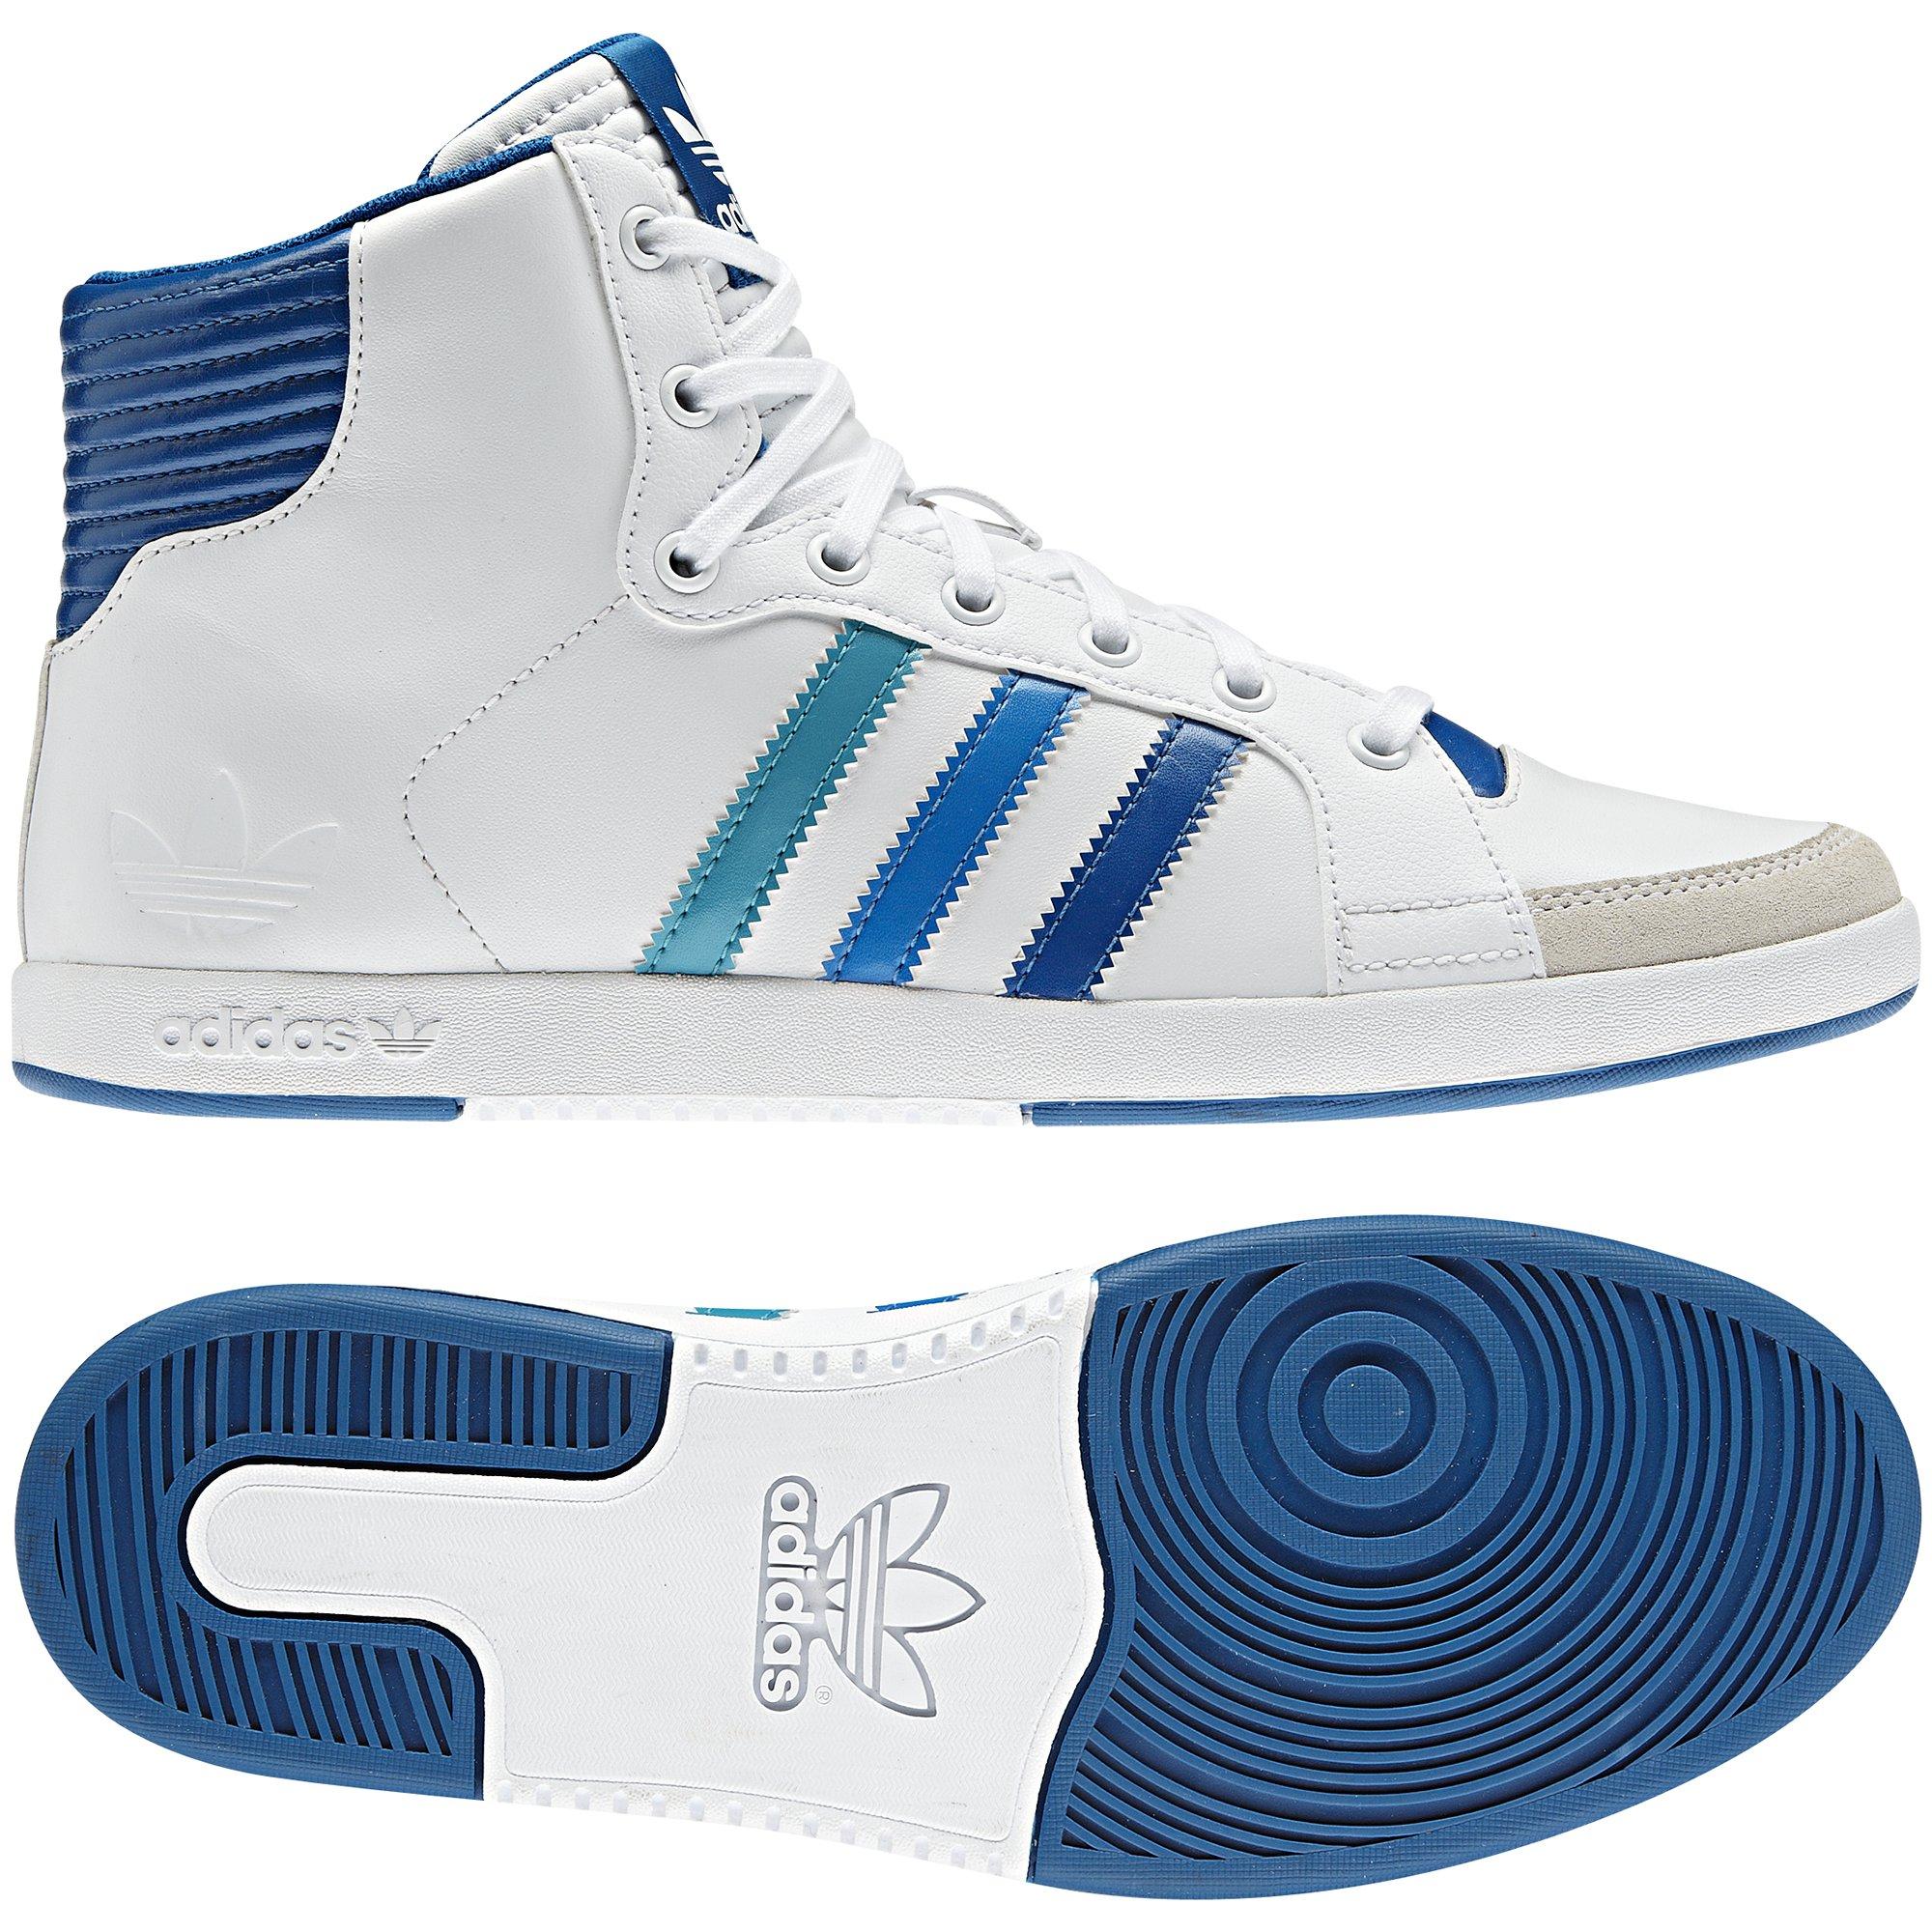 Foto adidas Court Side Hi Shoes Mujer foto 1207